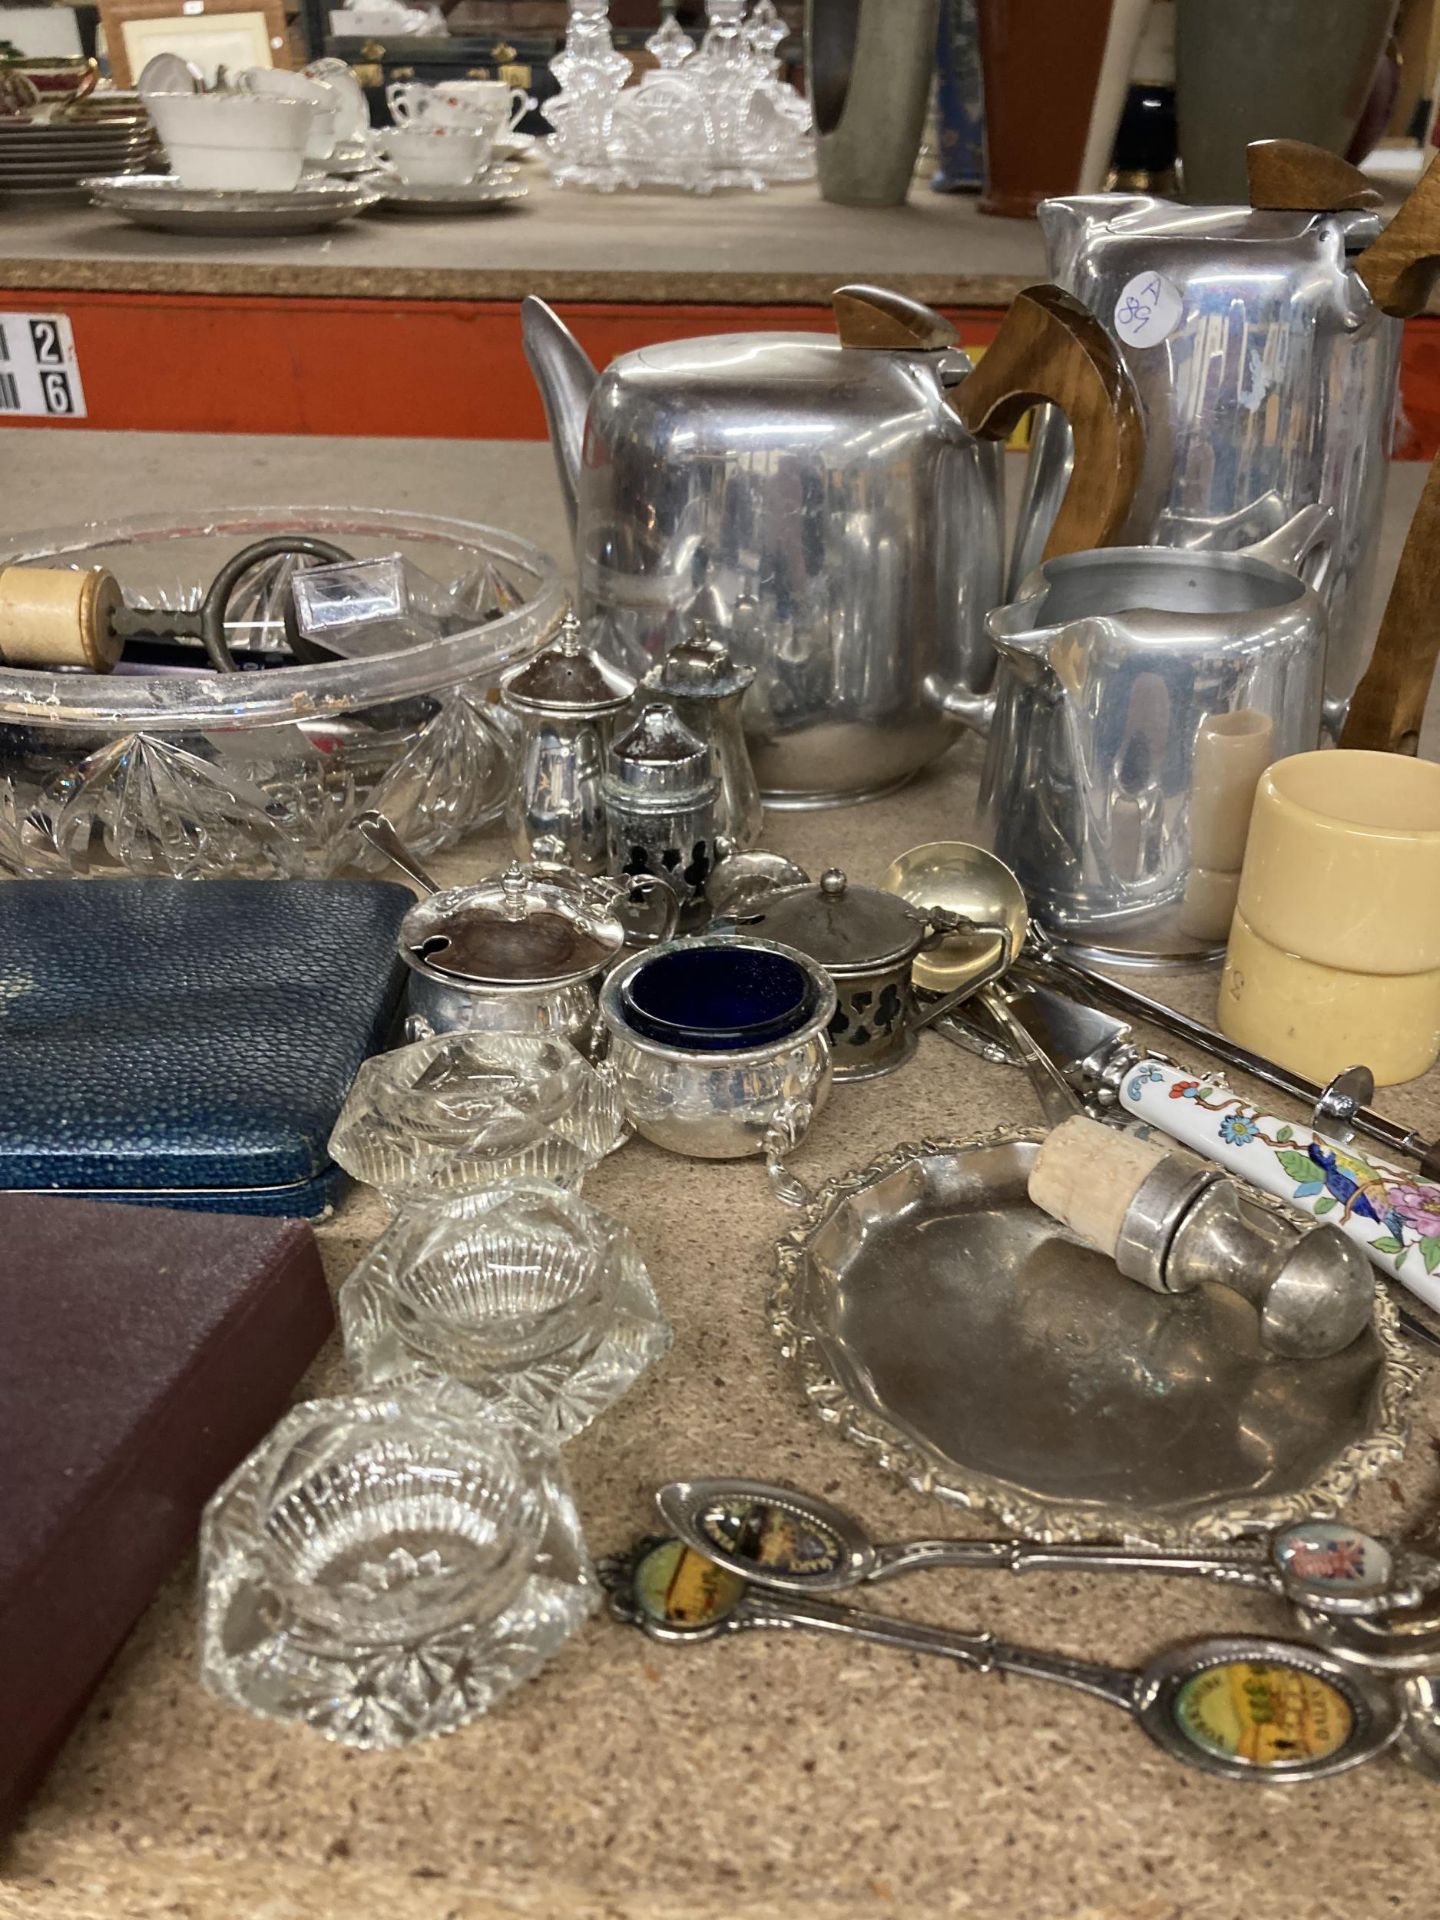 A MIXED VINTAGE LOT TO INCLUDE A PICQUOT WARE TEASET, NAPKIN RINGS, FLATWARE, SILVER PLATED - Bild 3 aus 4